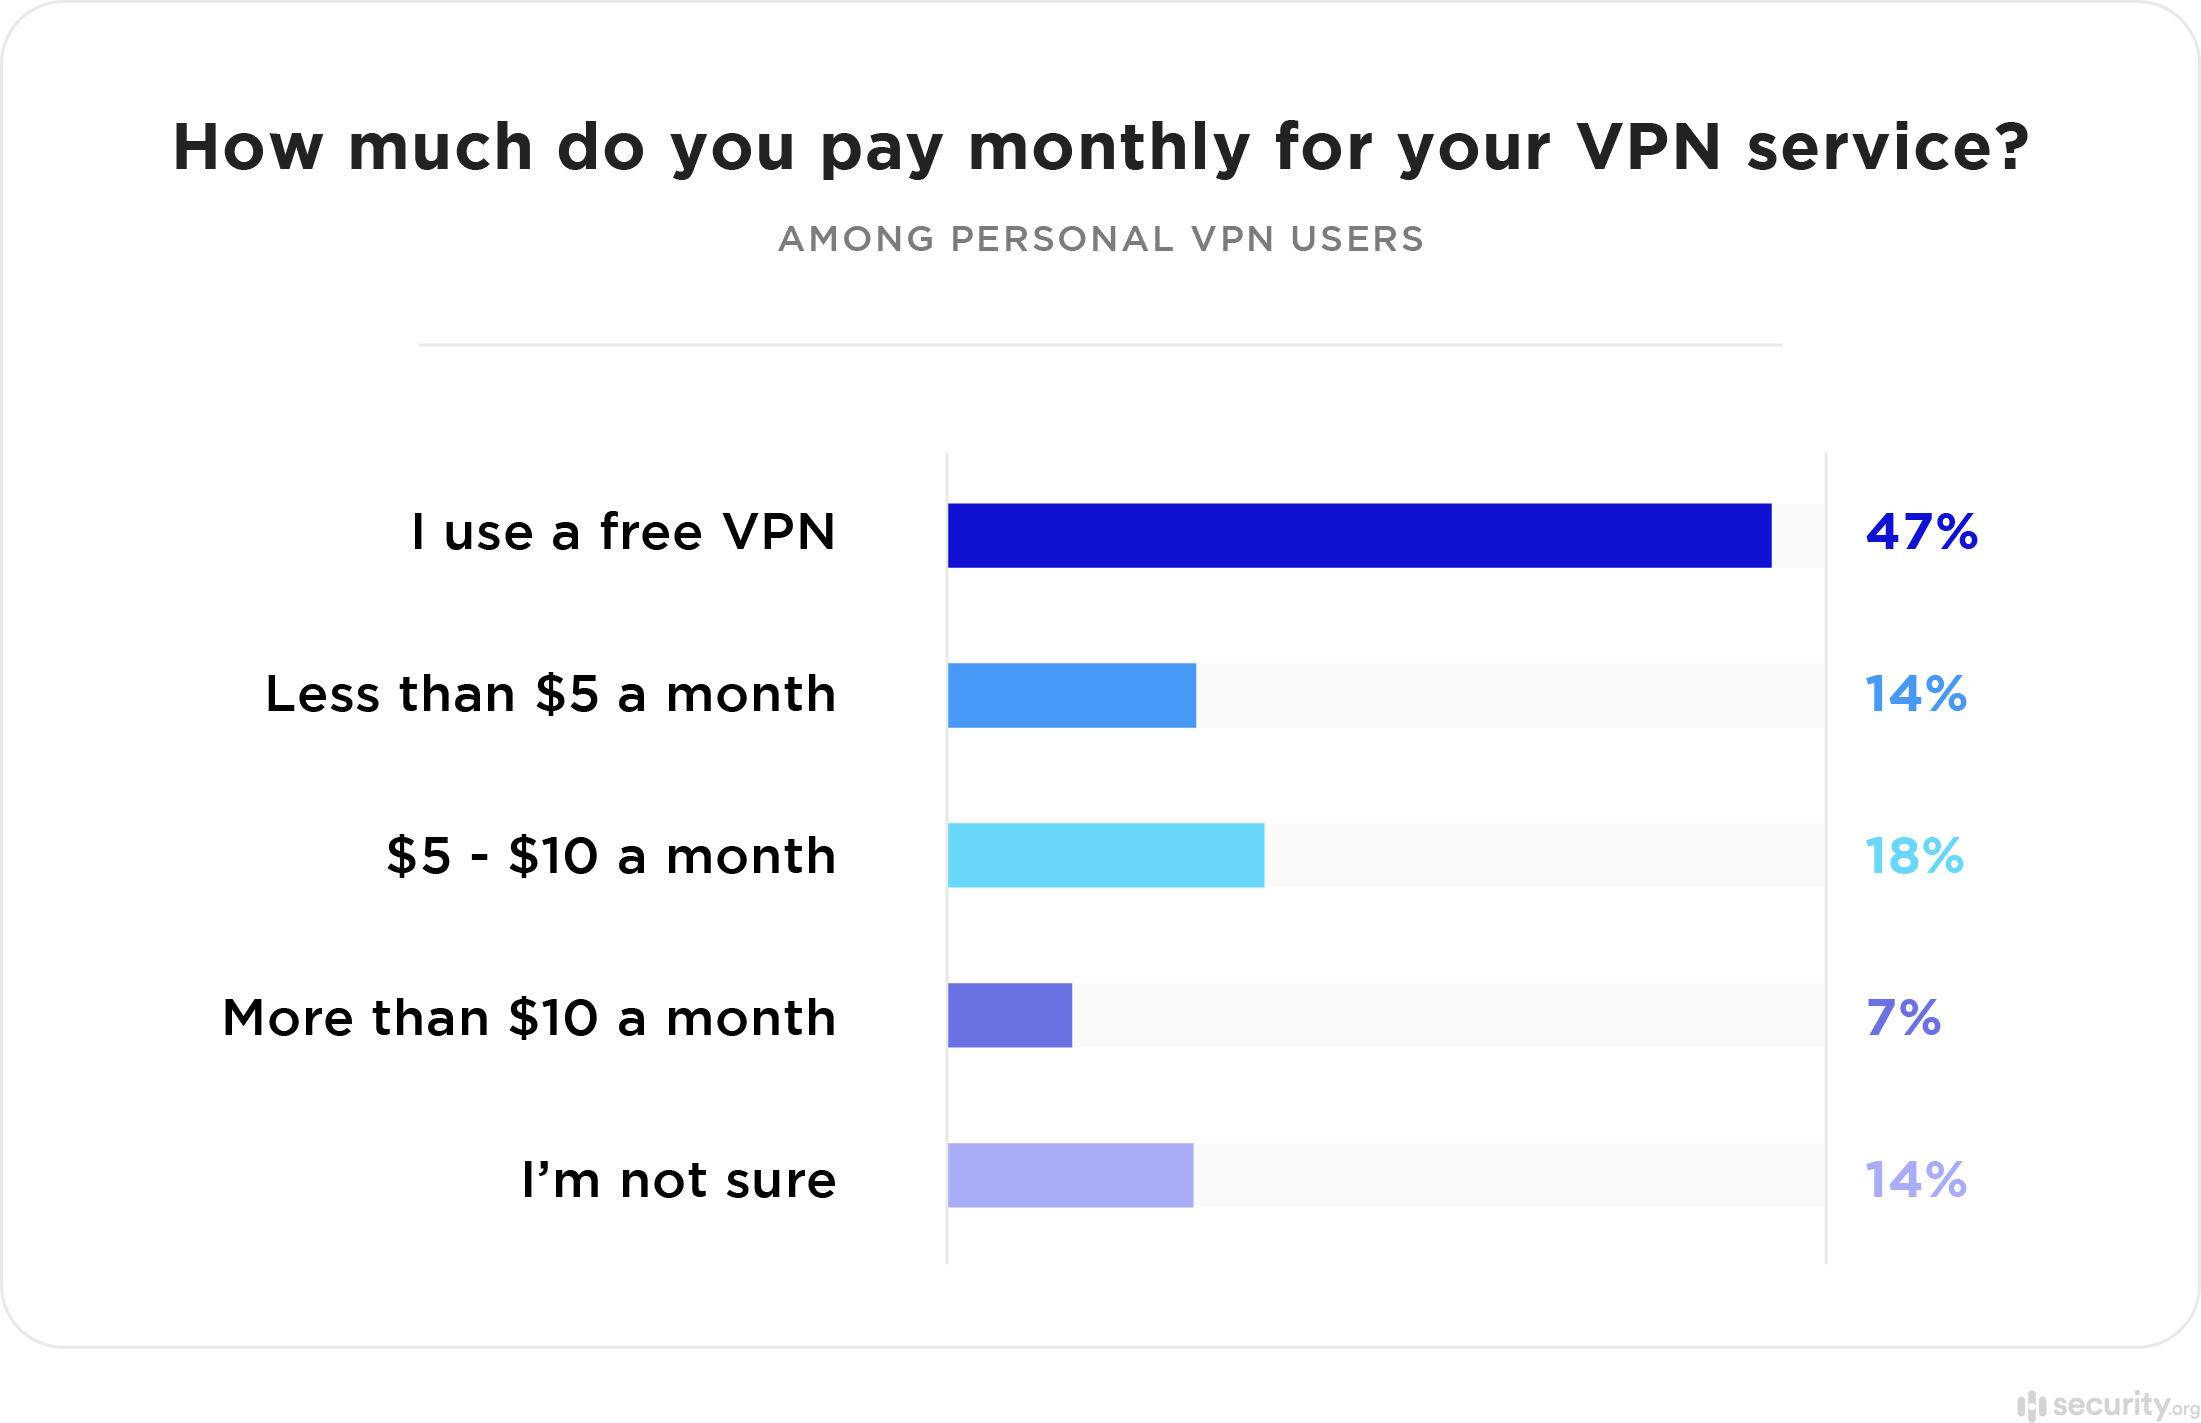 Cost of Monthly VPN Service